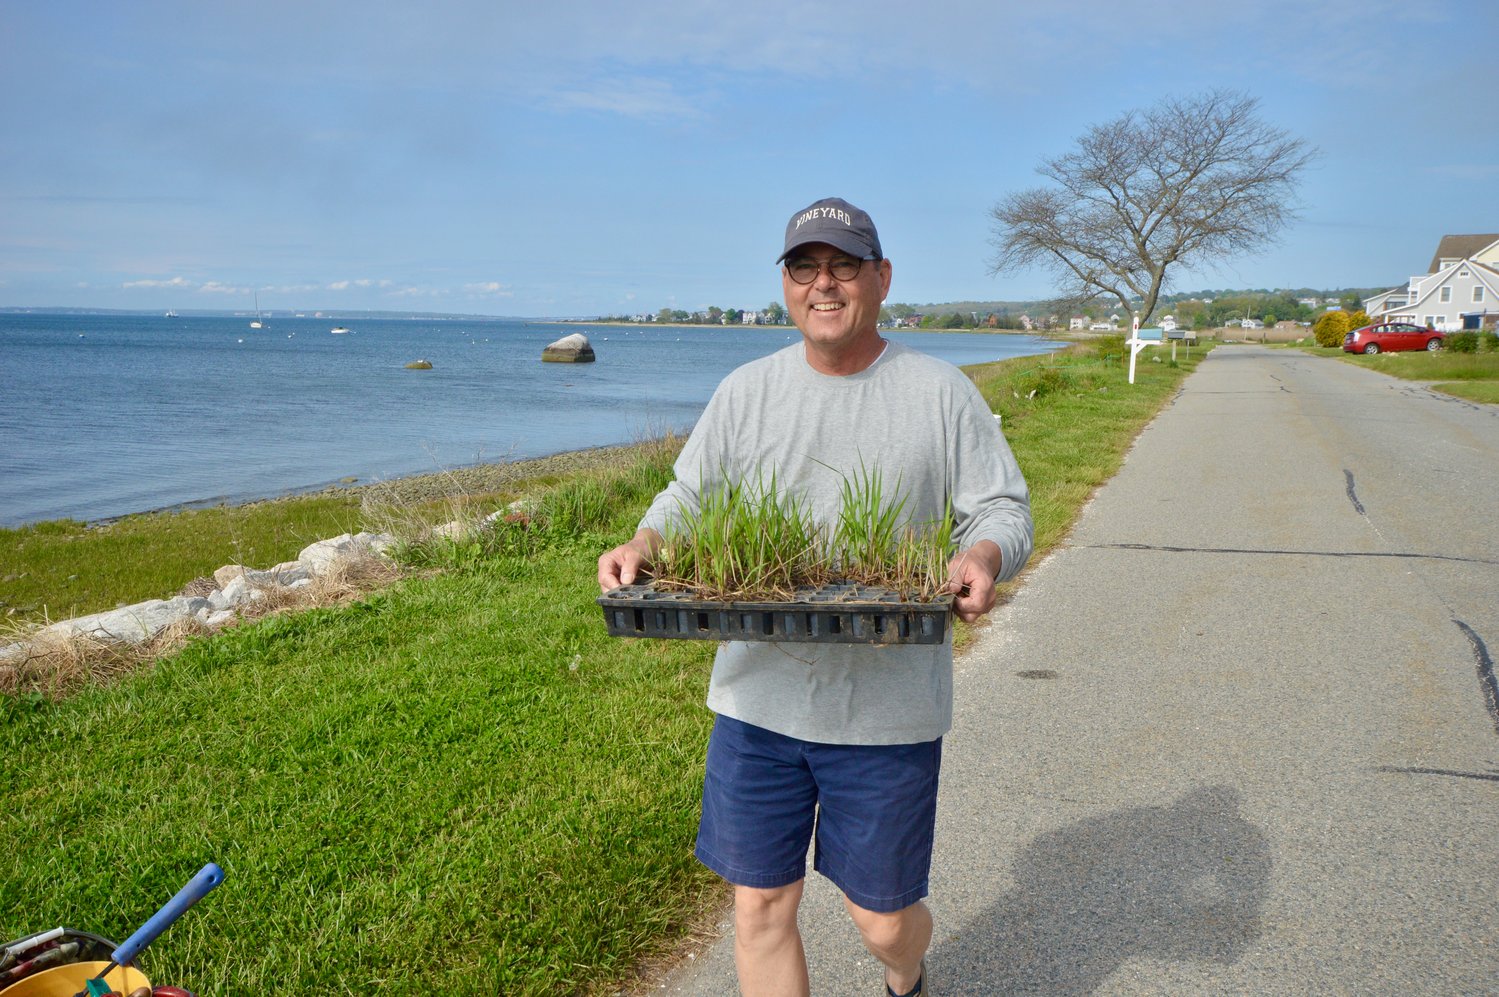 Jeff Prater, who chairs the Shoreline Education and Preservation Action Committee in Common Fence Point, carries a tray of switchgrass for volunteers to plant along Common Fence Point Boulevard Monday afternoon. About 100 of that variety were planted.